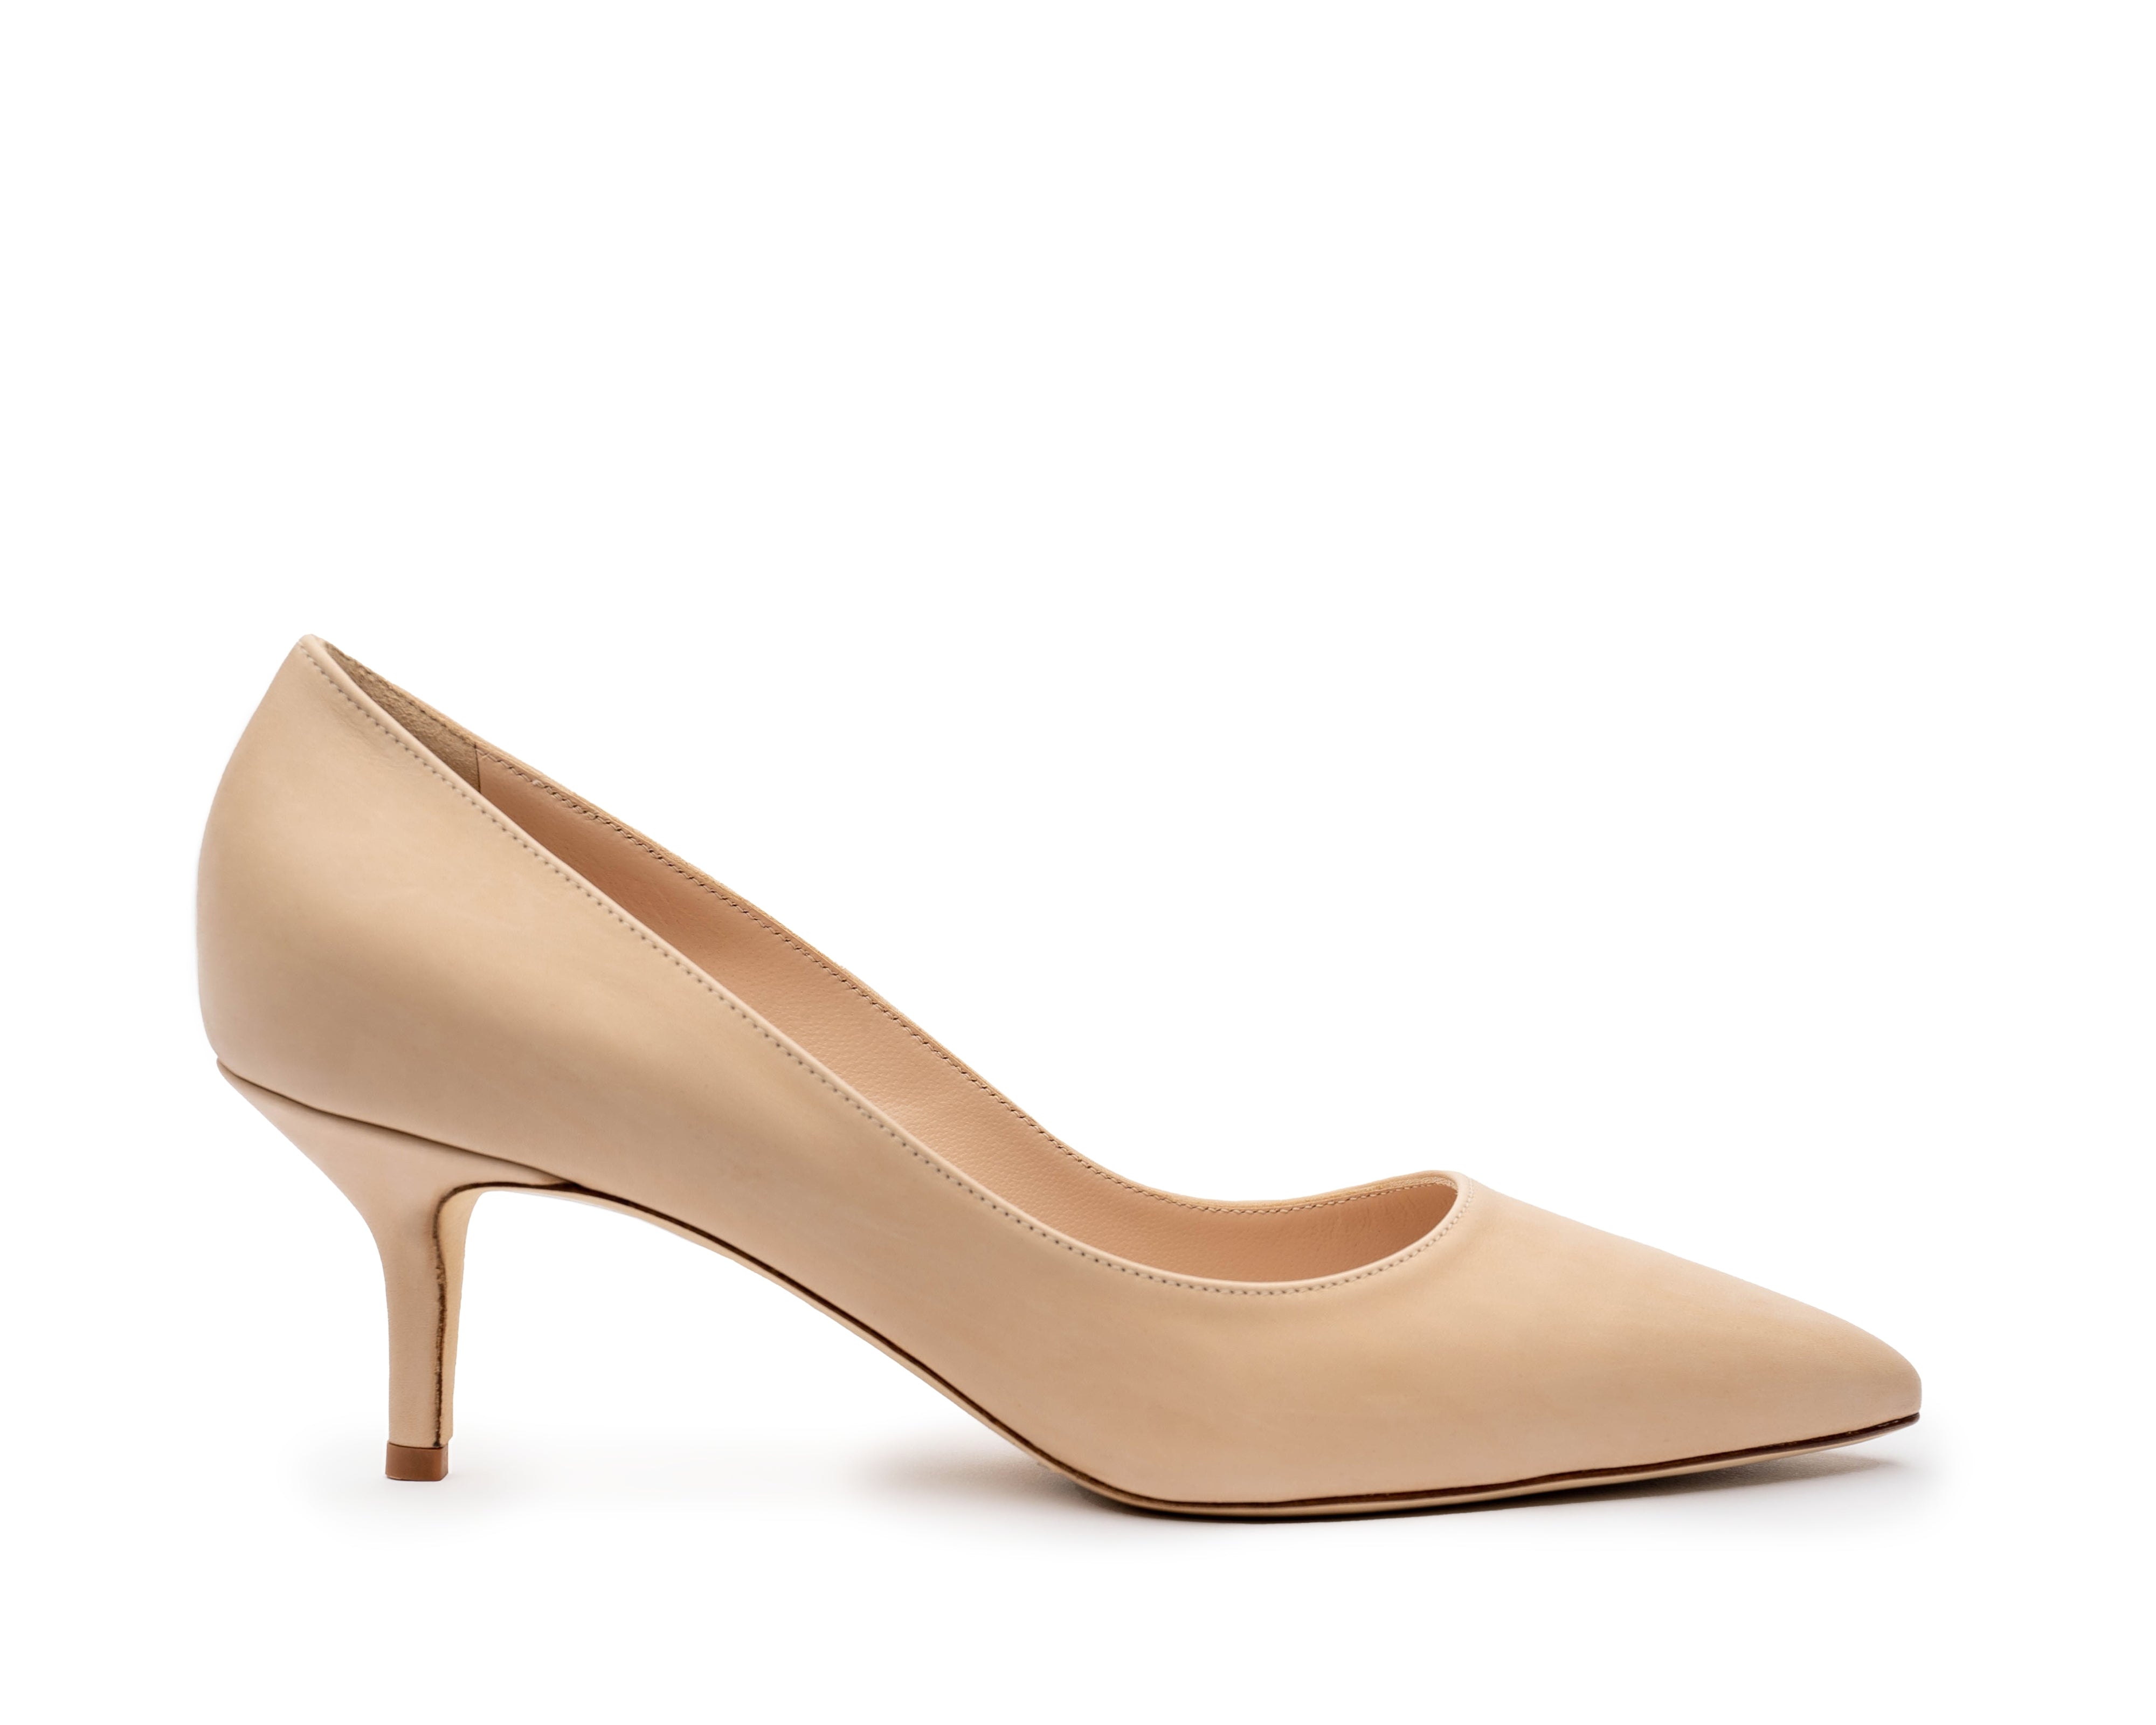 Off white nude skin tone pumps. True to your shade.